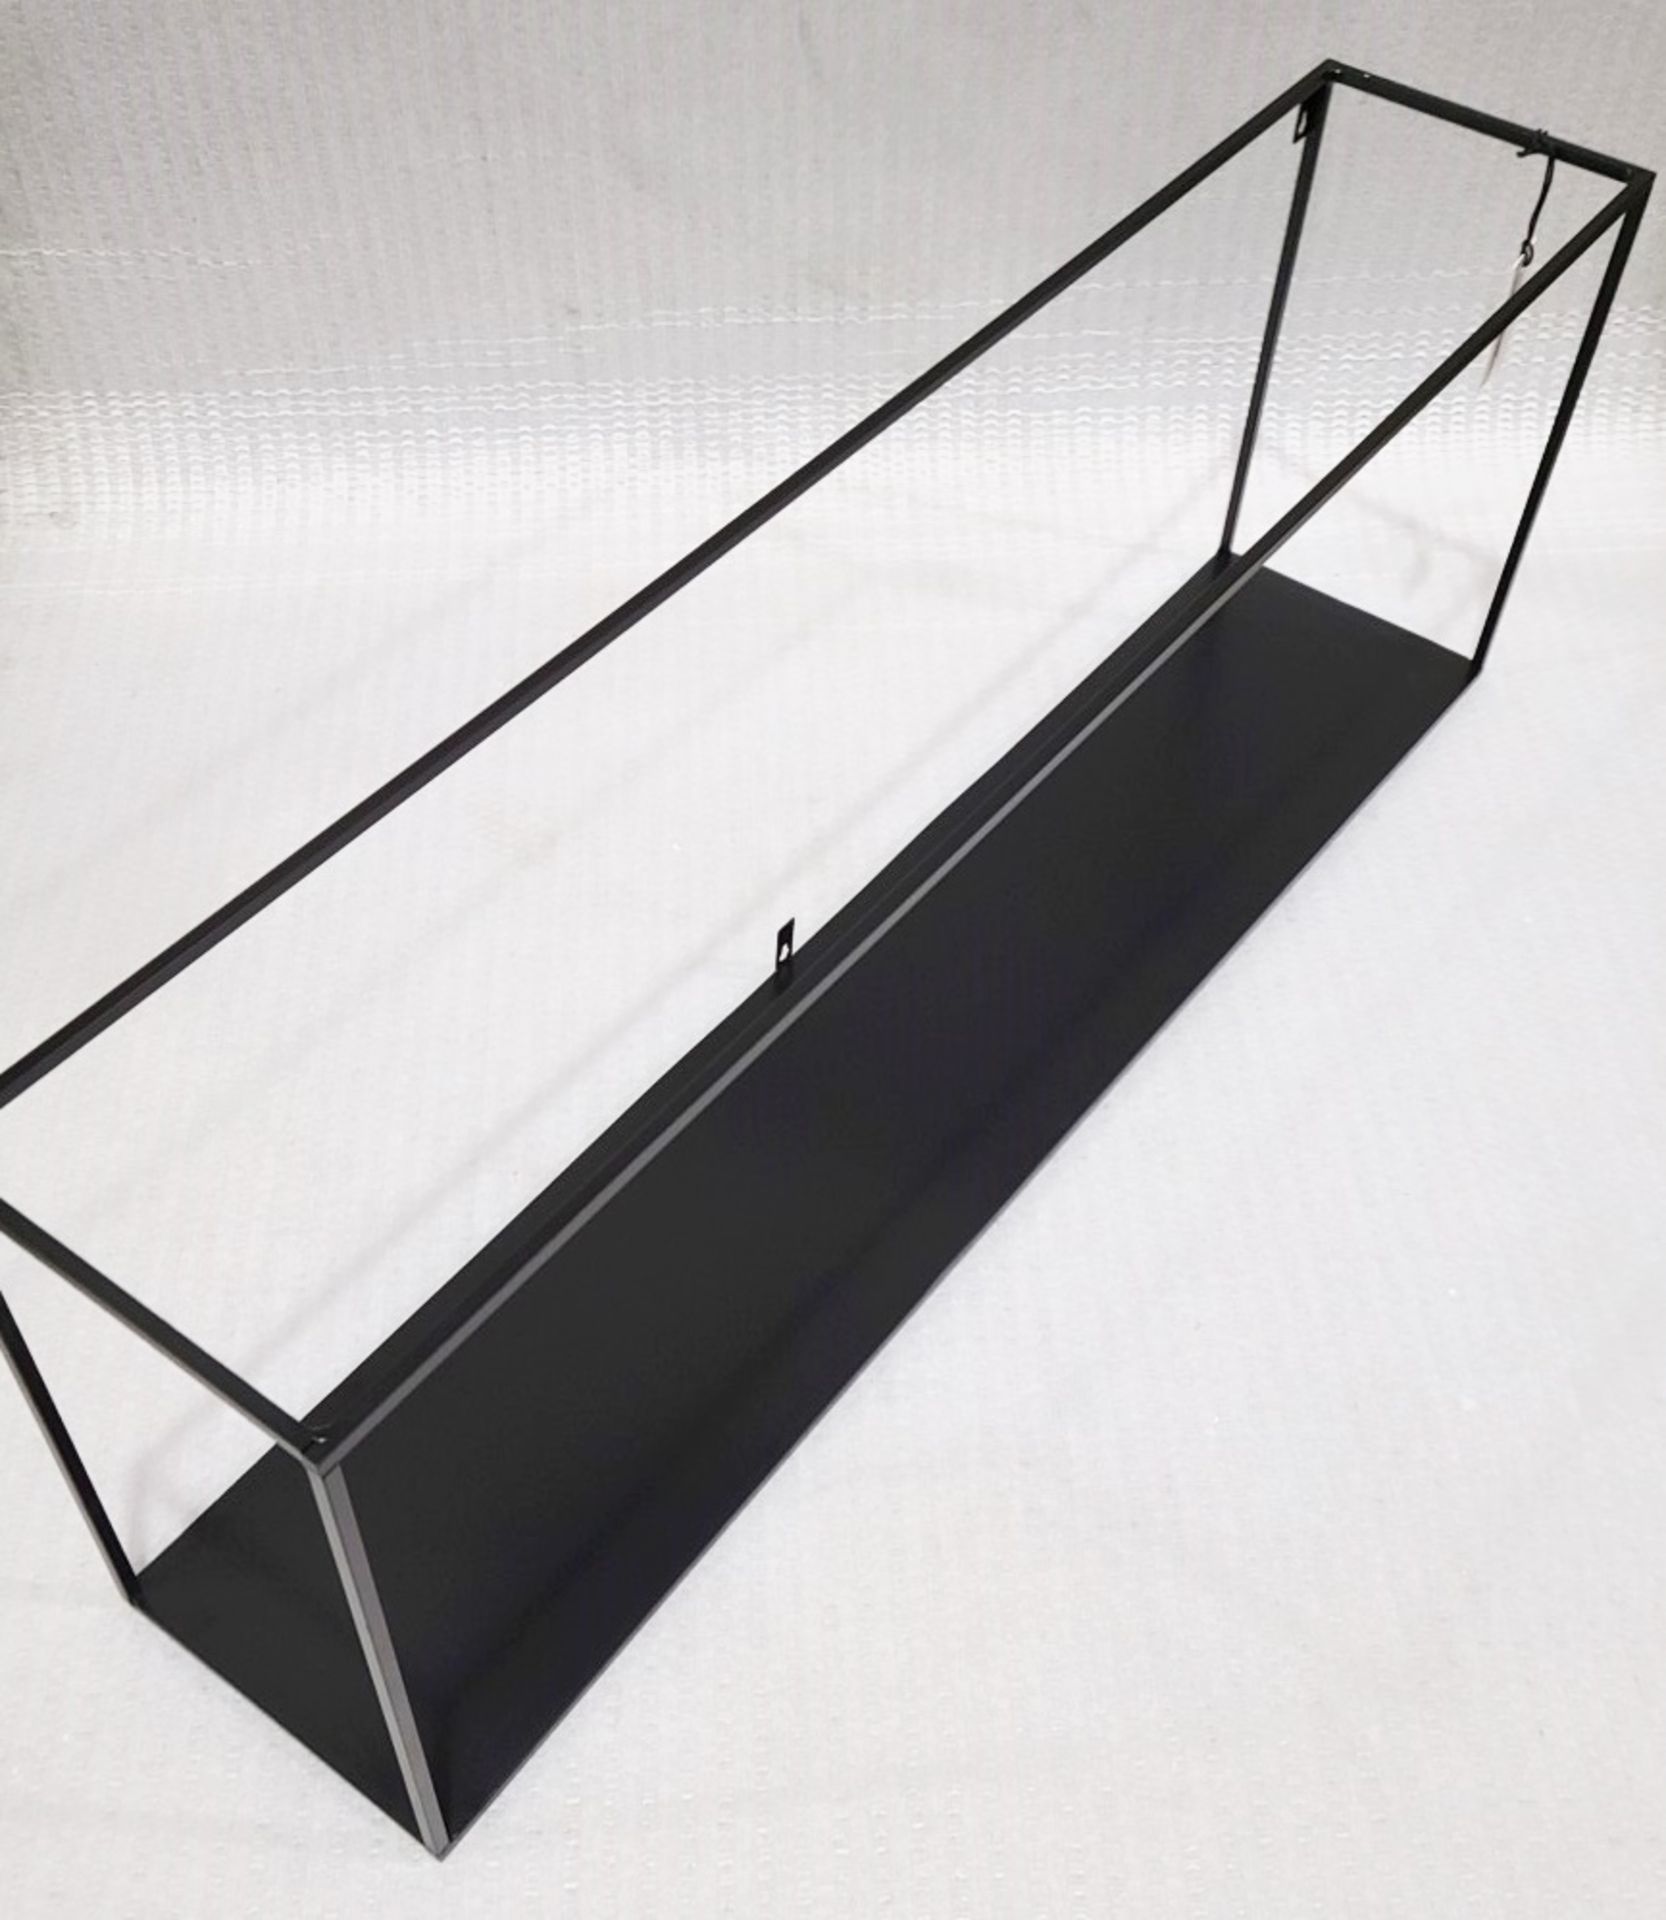 1 x WOOOD 'Meert' Black Metal Extra Storage Wall Shelf With Black Lacquered Finish 100cm - Image 6 of 7